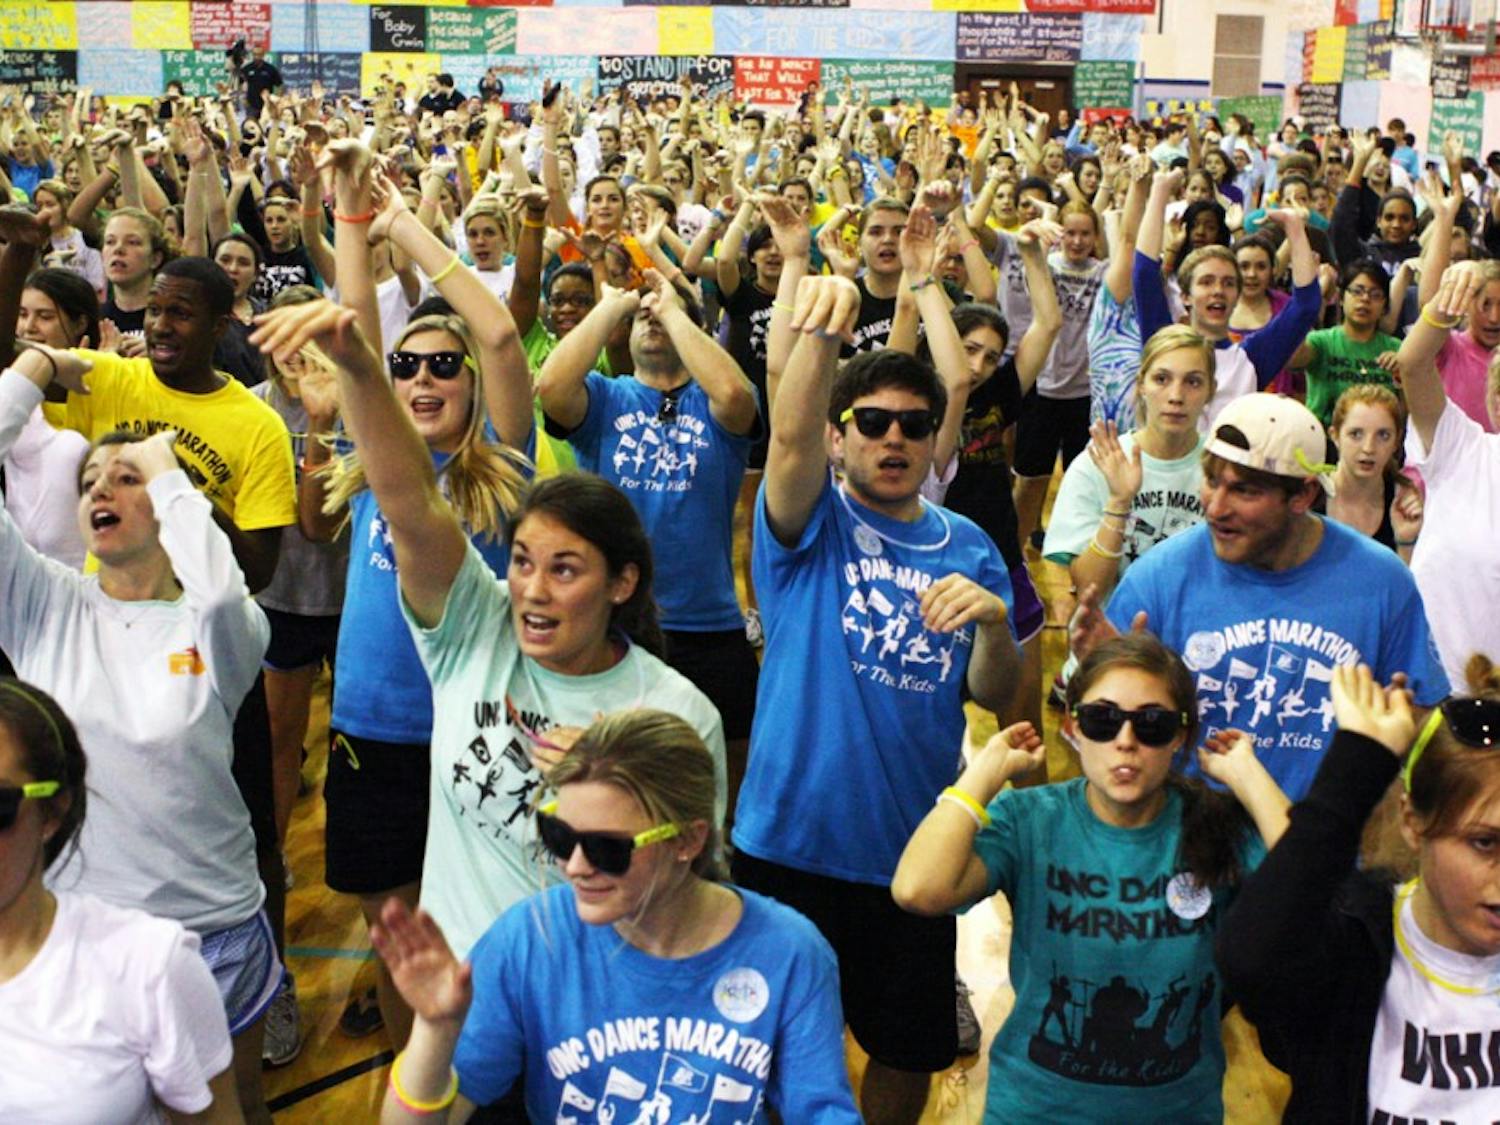 UNC Dance Marathon earned over $436,000 for the UNC Children's Hospital.  Participants were on their feet for 24 hours.  The event too place in Fetzer gym.  